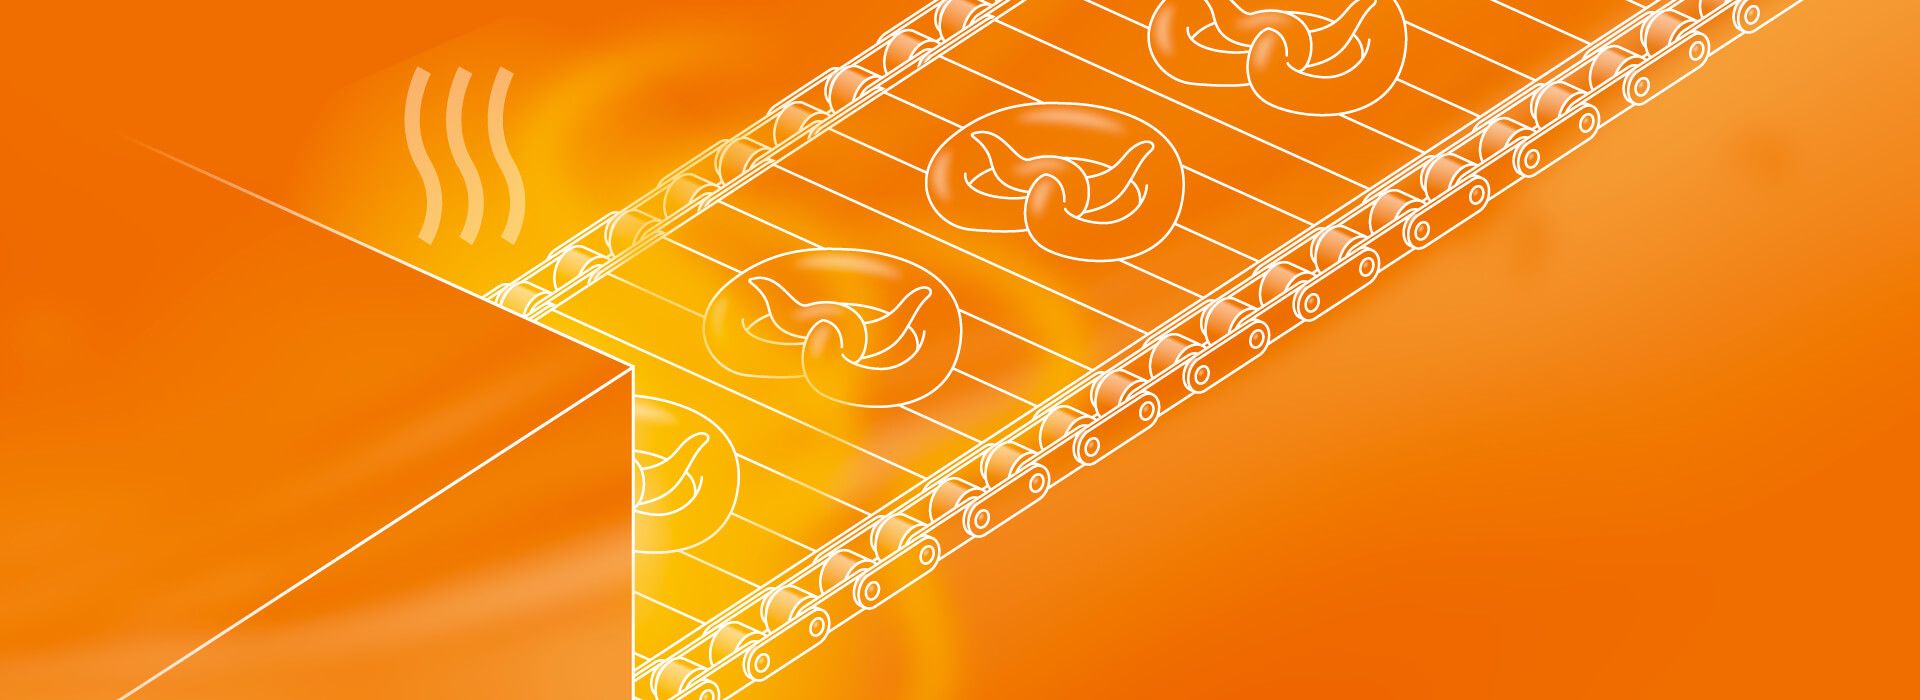 Illustration: A conveyor belt with pretzel blanks enters an oven. The blanks, conveyor belt and oven are shown as a white line drawing on a colored background.